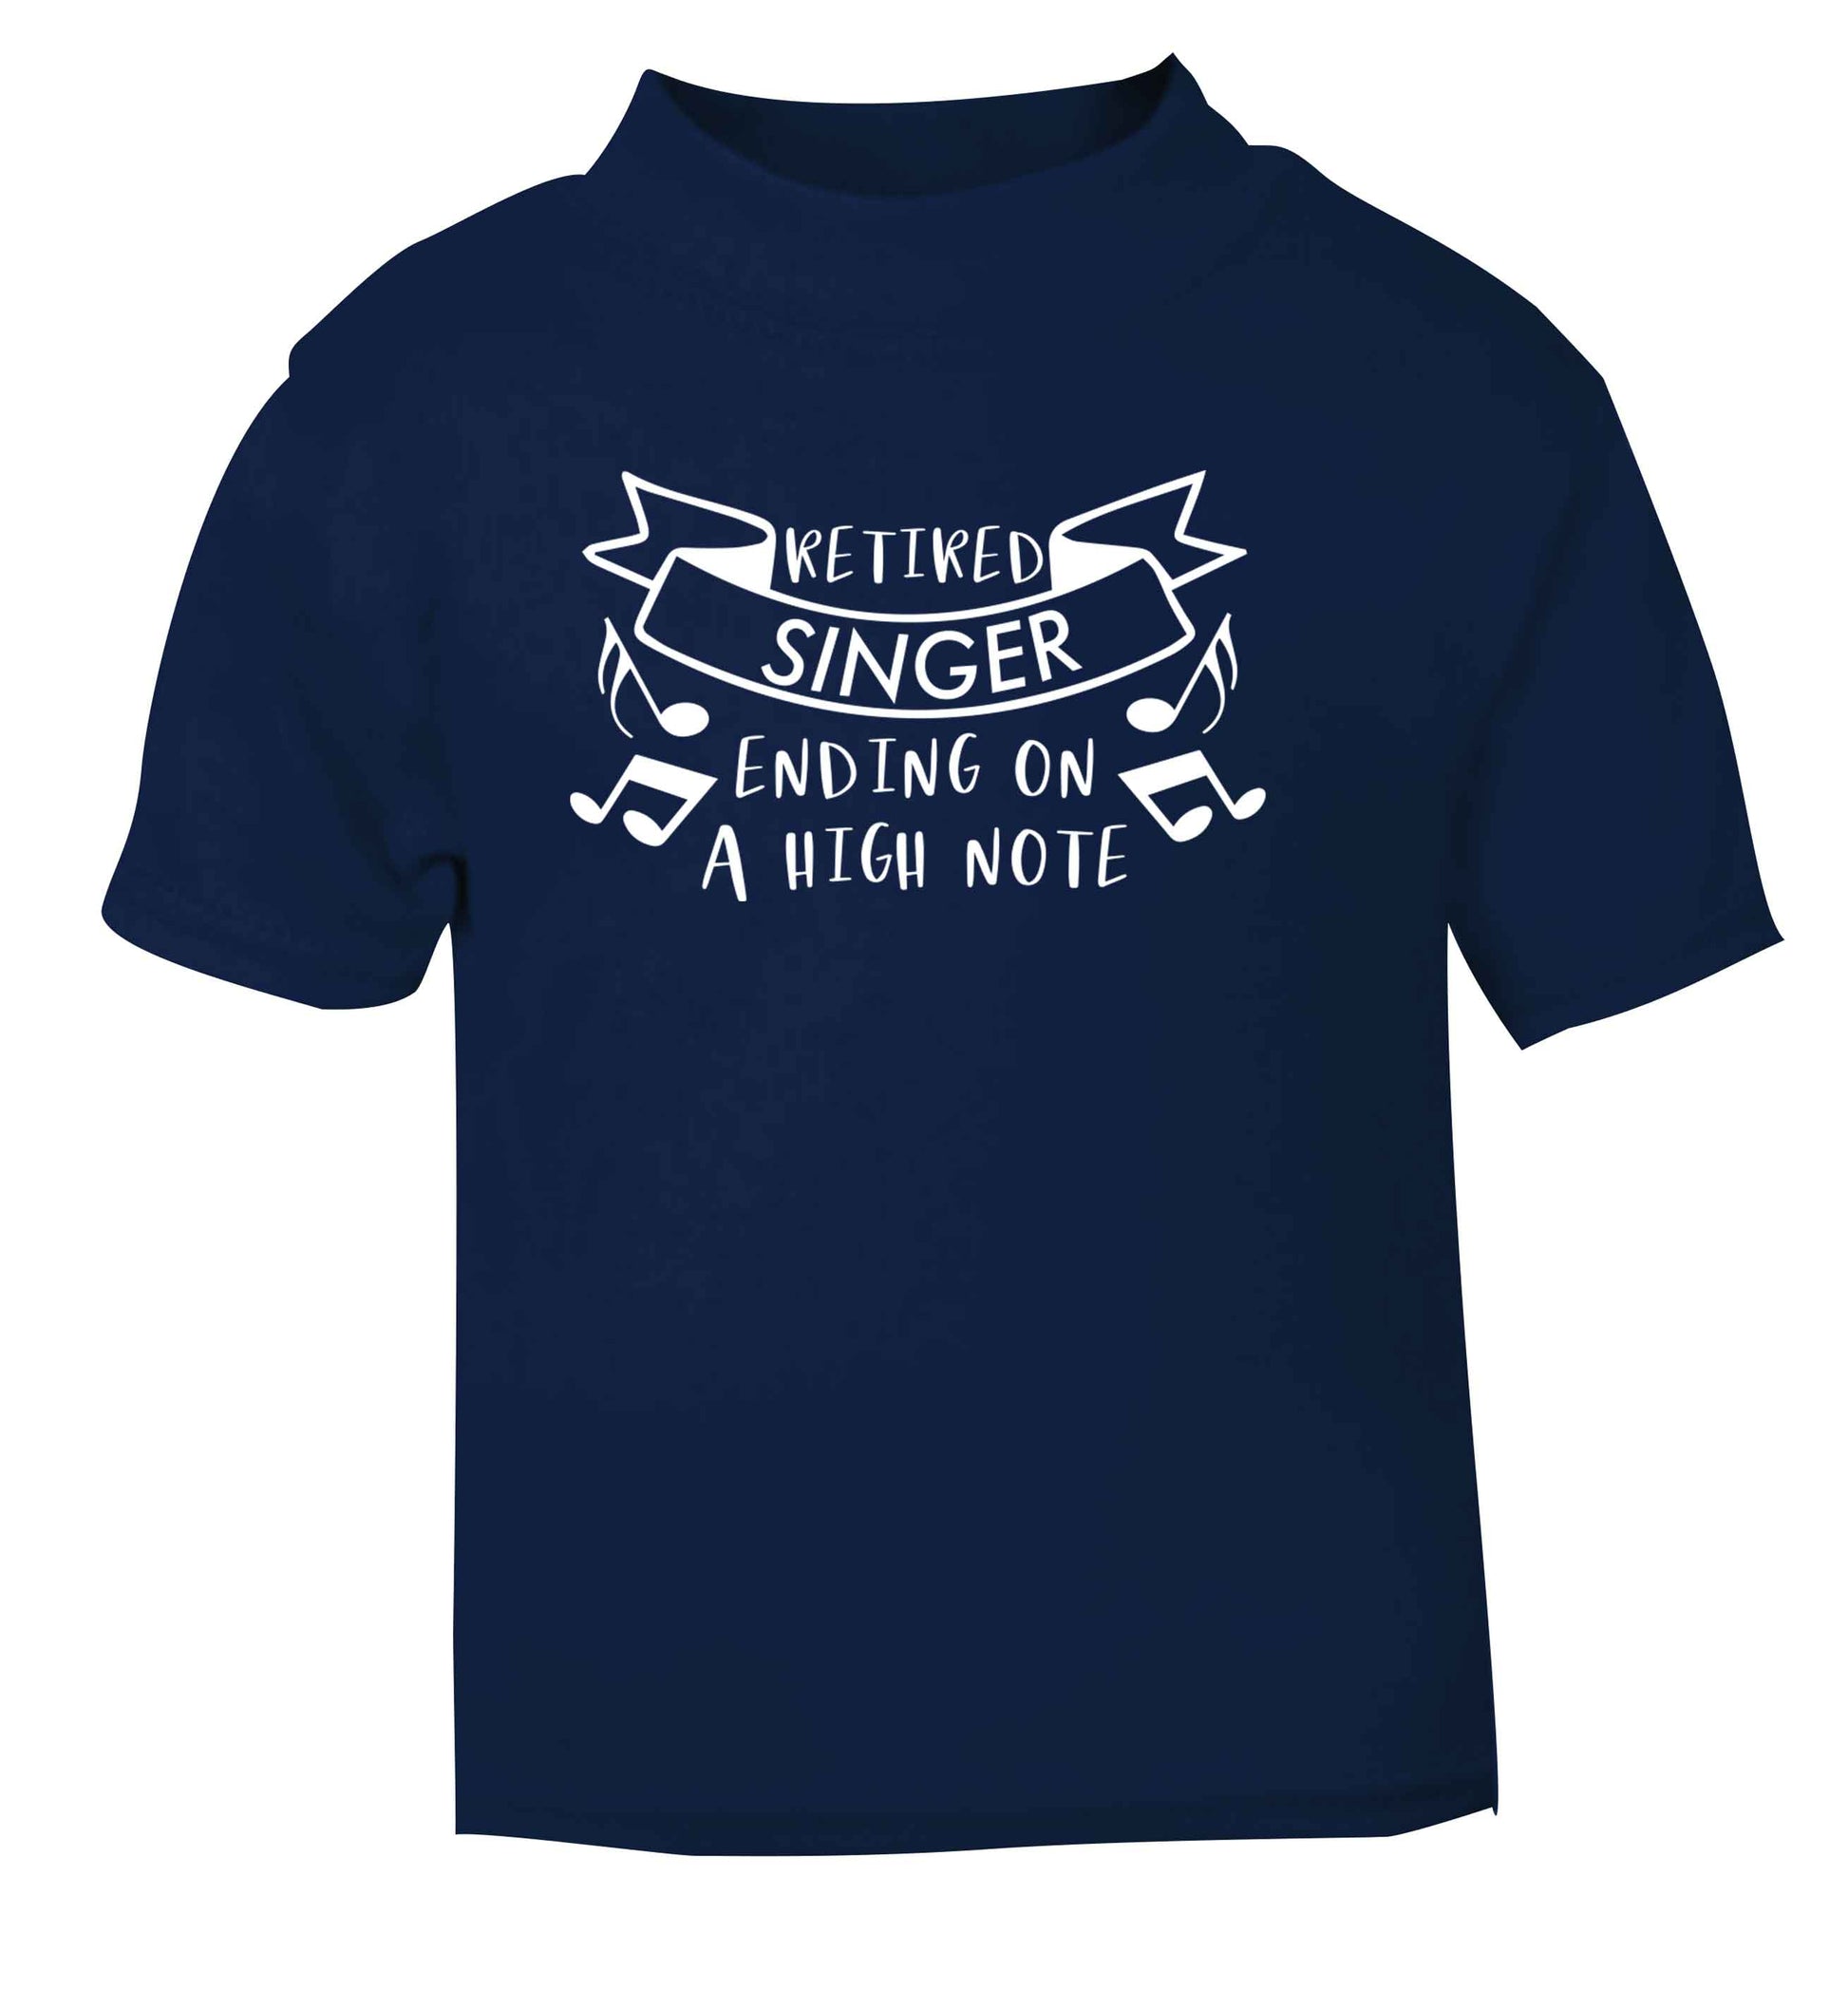 Retired singer ending on a high note navy Baby Toddler Tshirt 2 Years